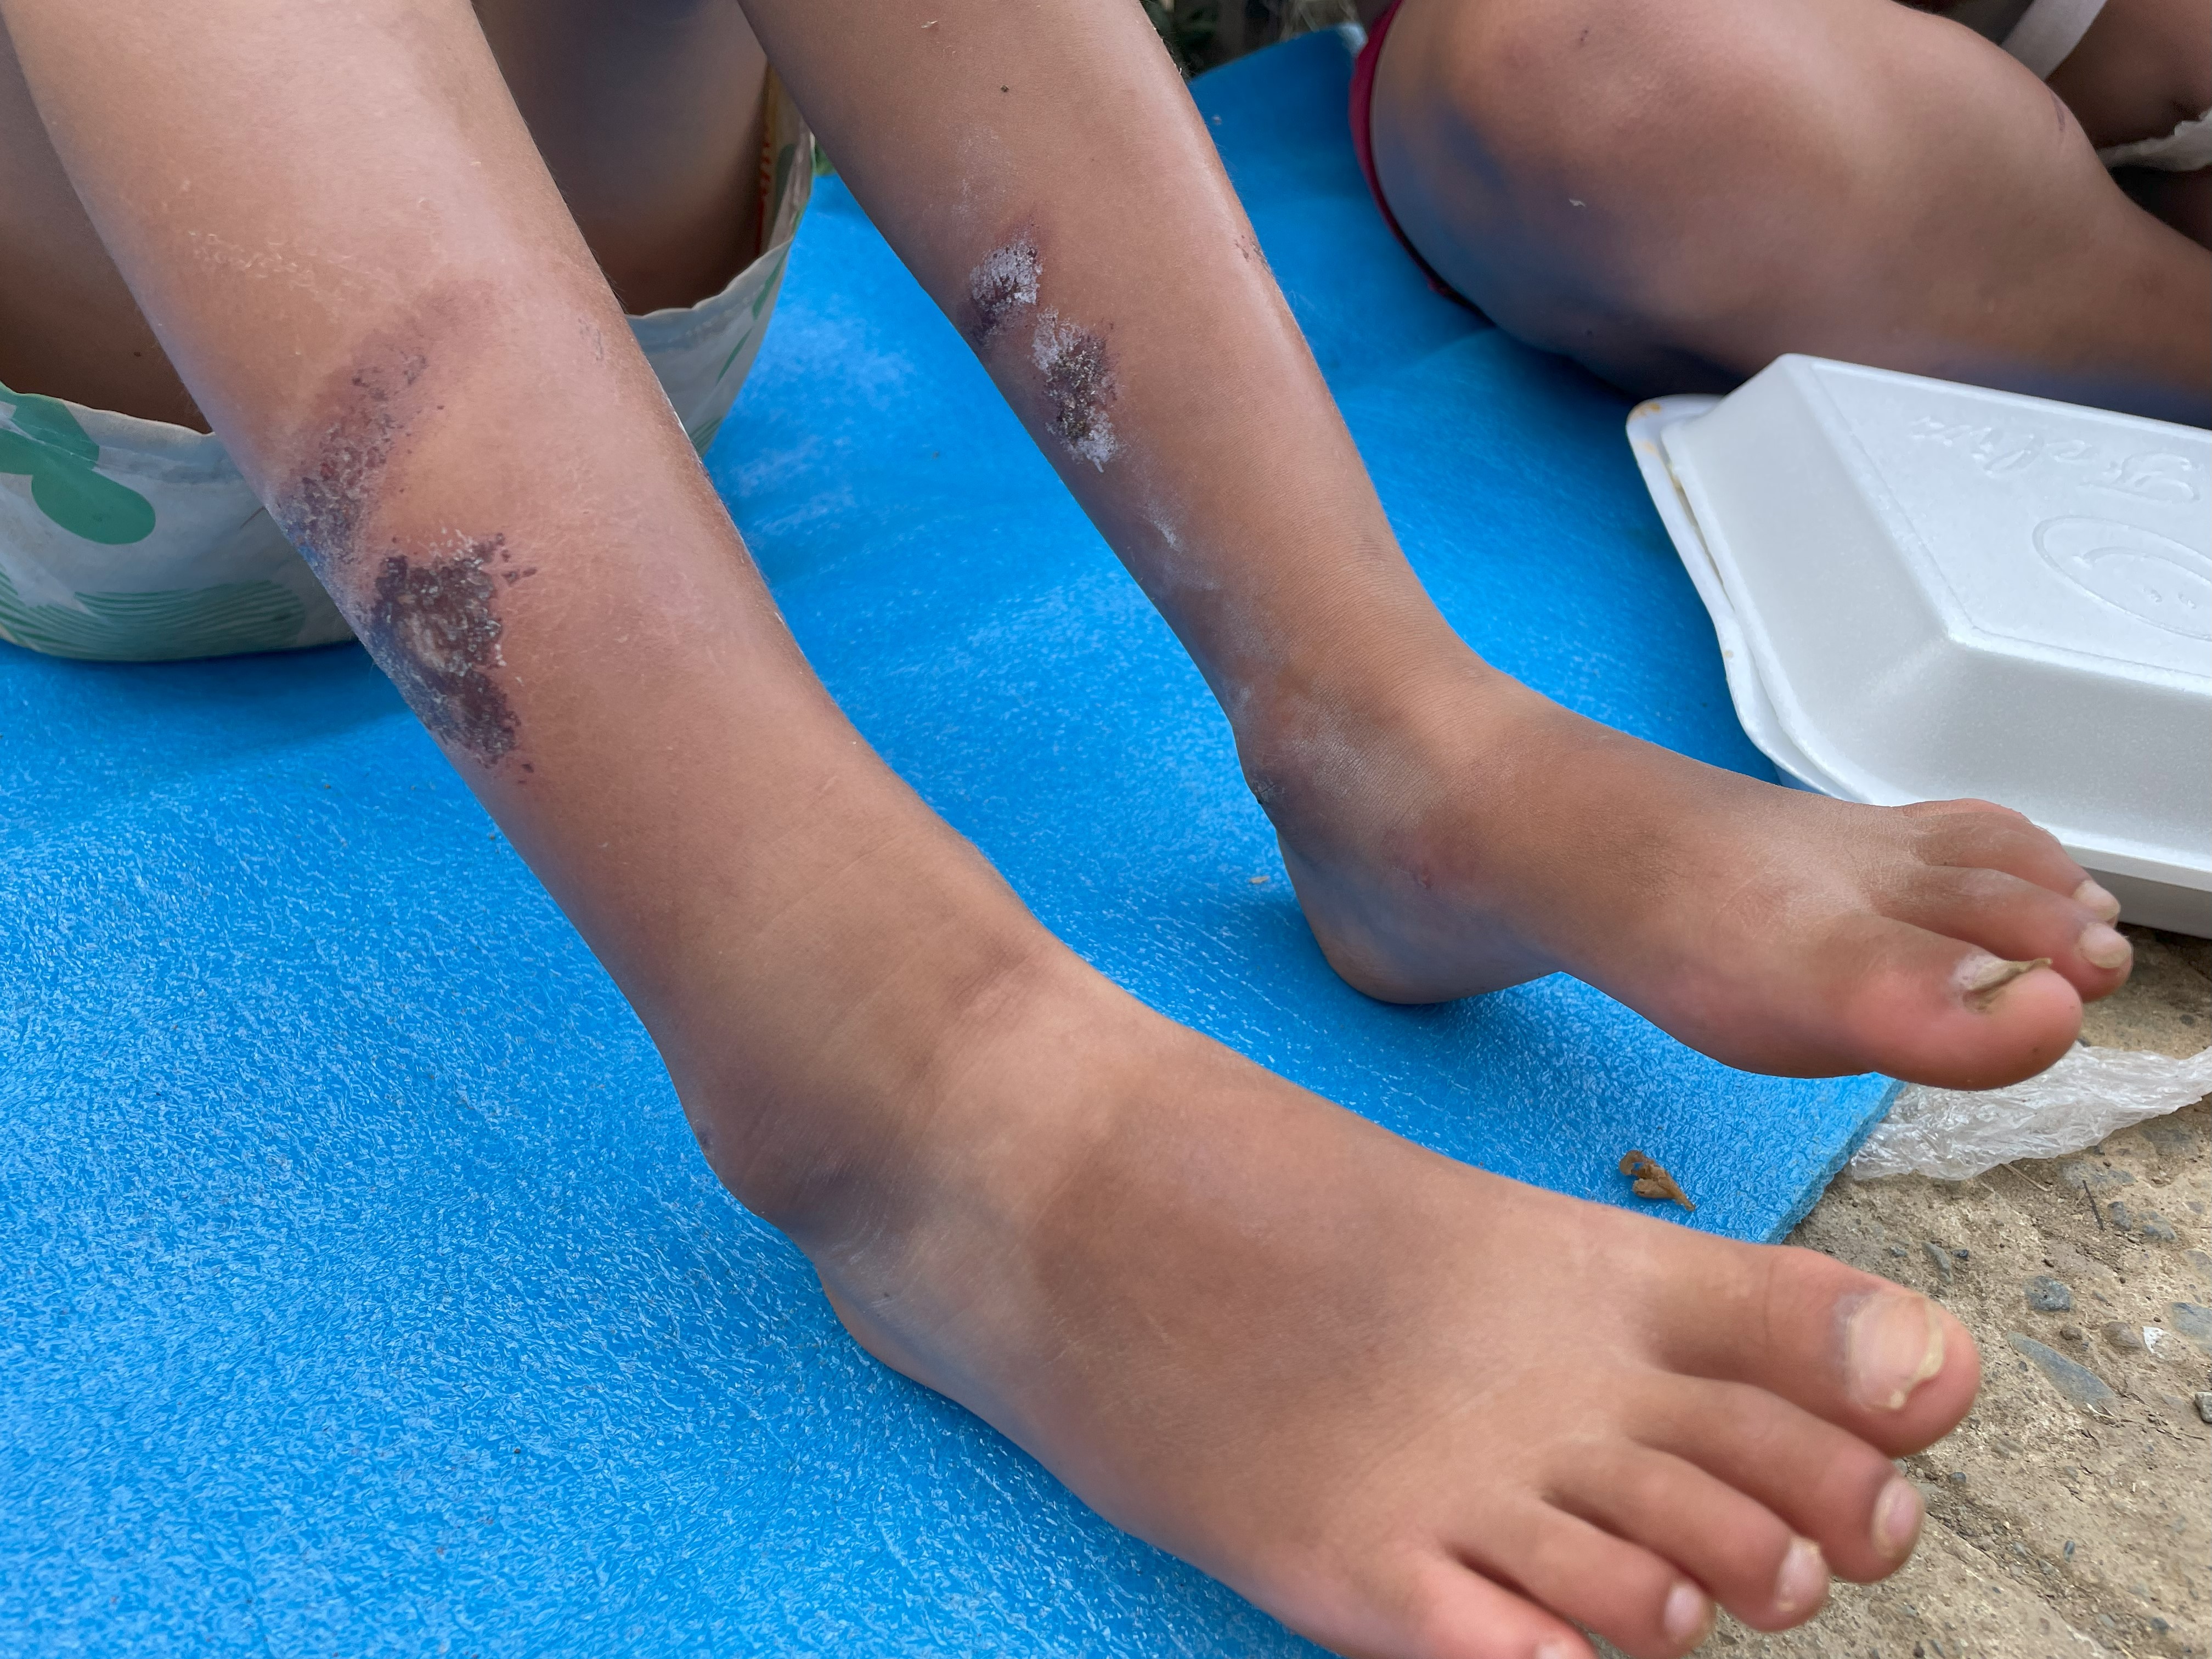 5-year-old girl has sores on her legs from the plastic boots she wore